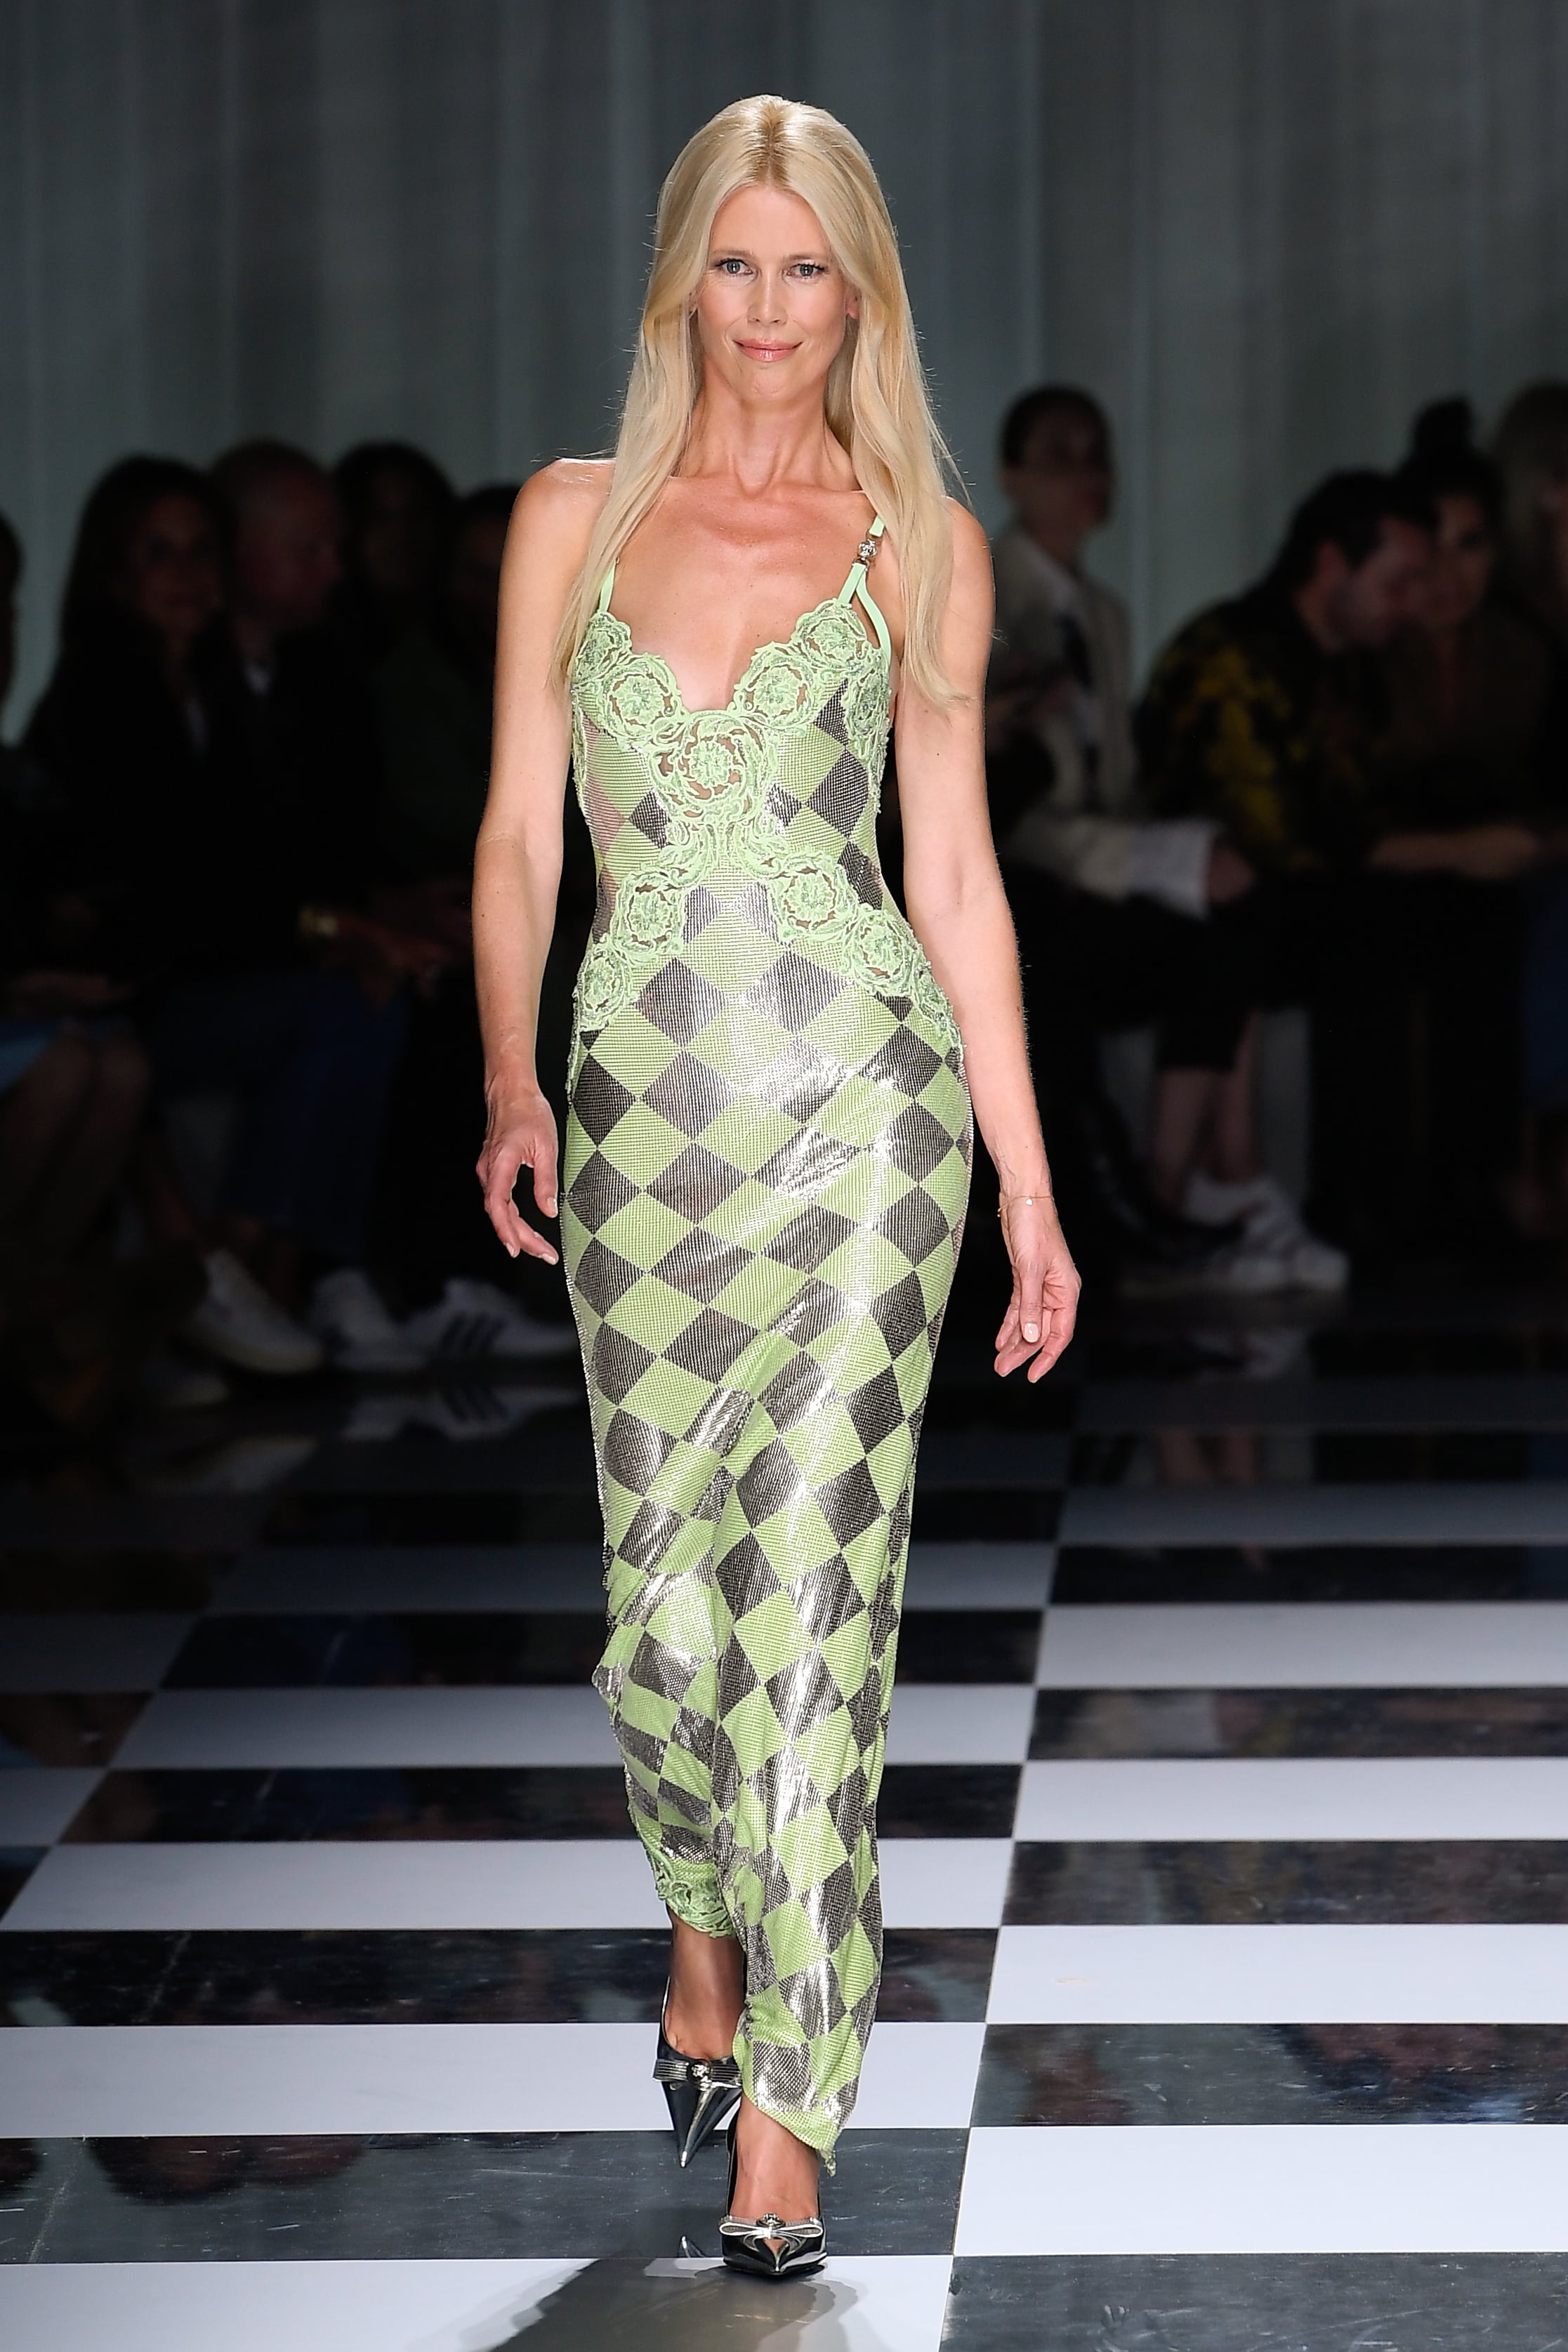 Versace couture fashion show: Paris wowed by show of chiffon-clad strength, Versace